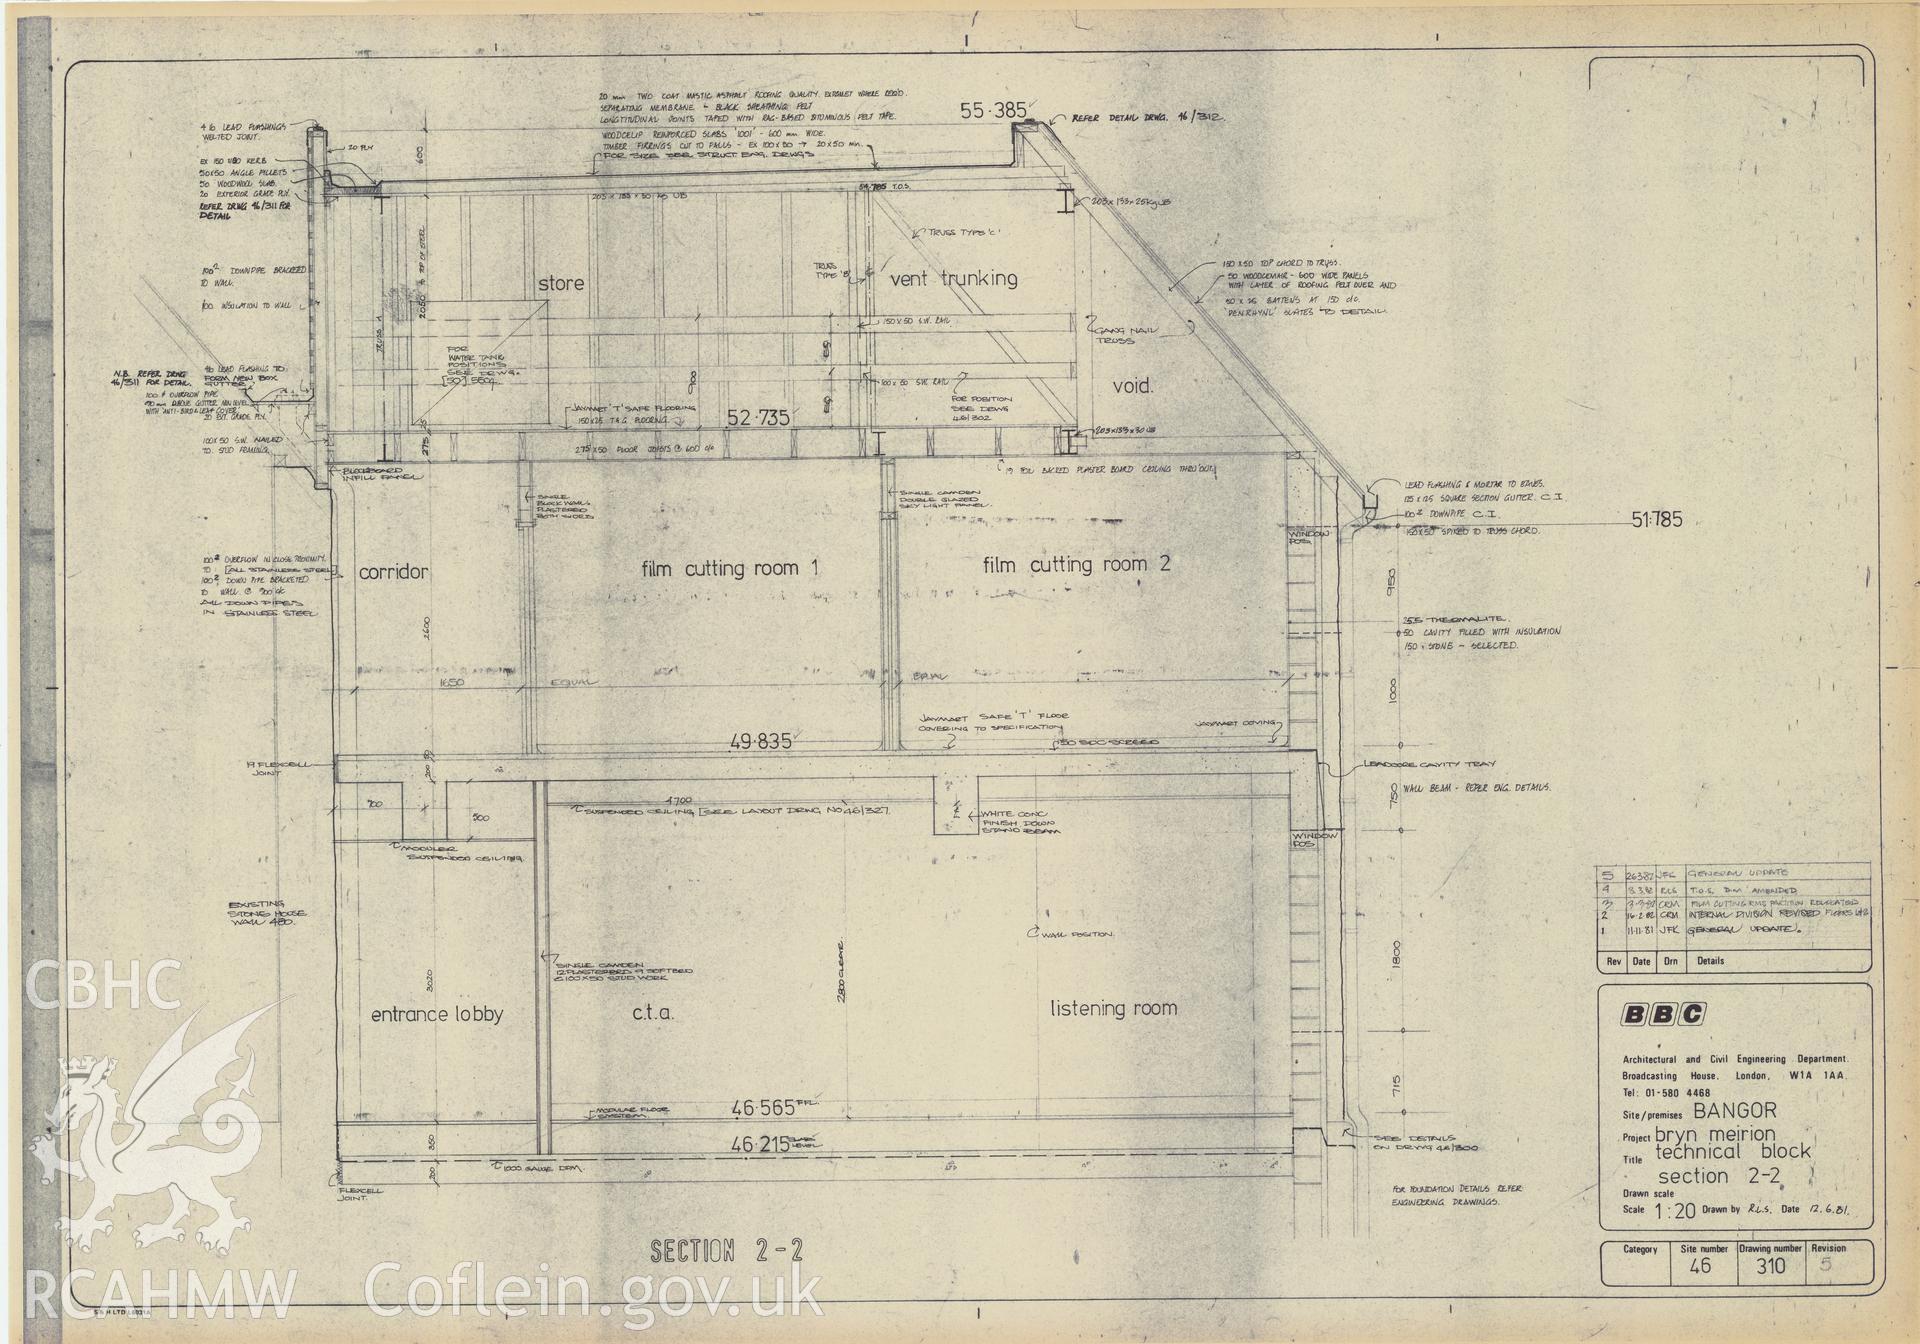 BBC premises, Broadcasting House, Bangor - plan and section drawing of the technical block at Bryn Meirion. Drawing No. 46/310 R5. March 1982.